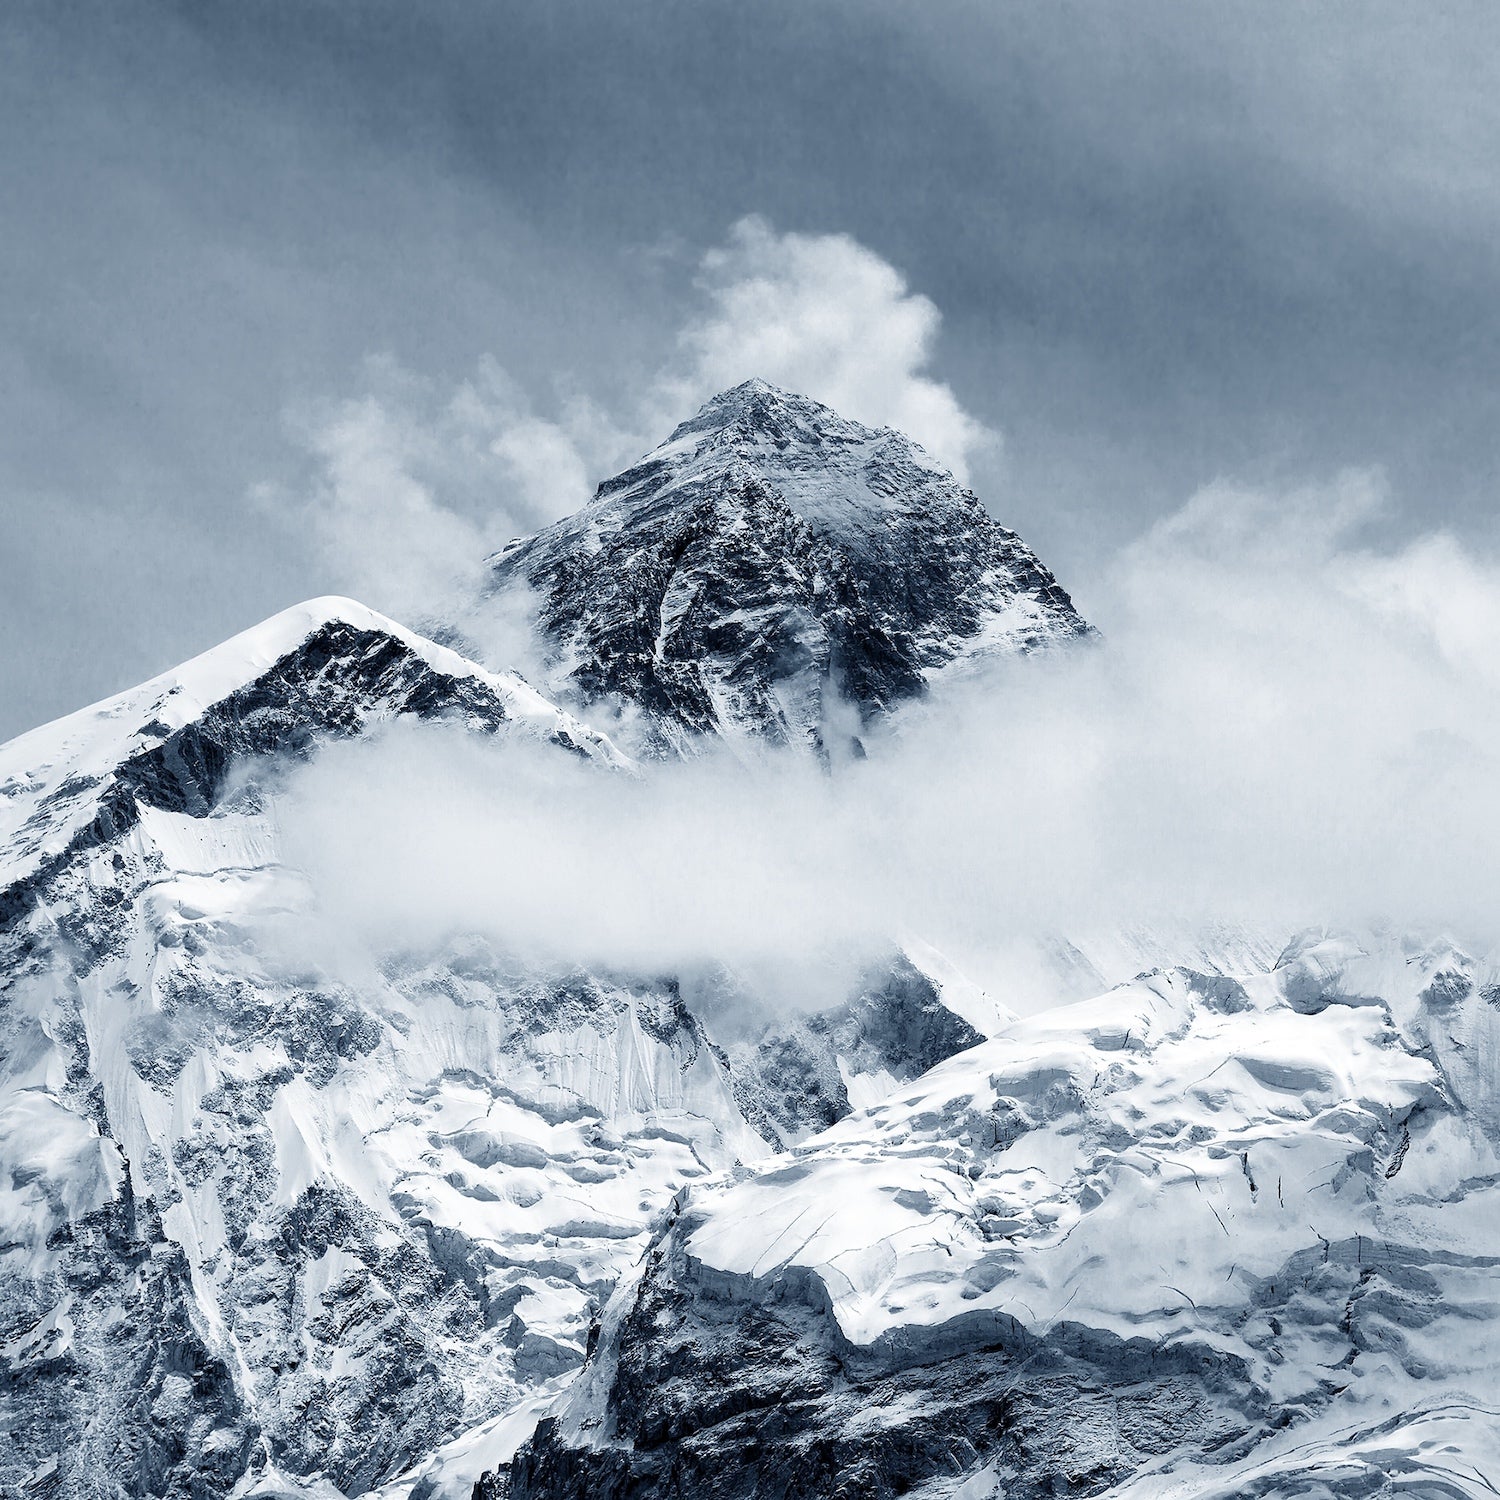 Mount Everest: The deadly history of the world's highest peak